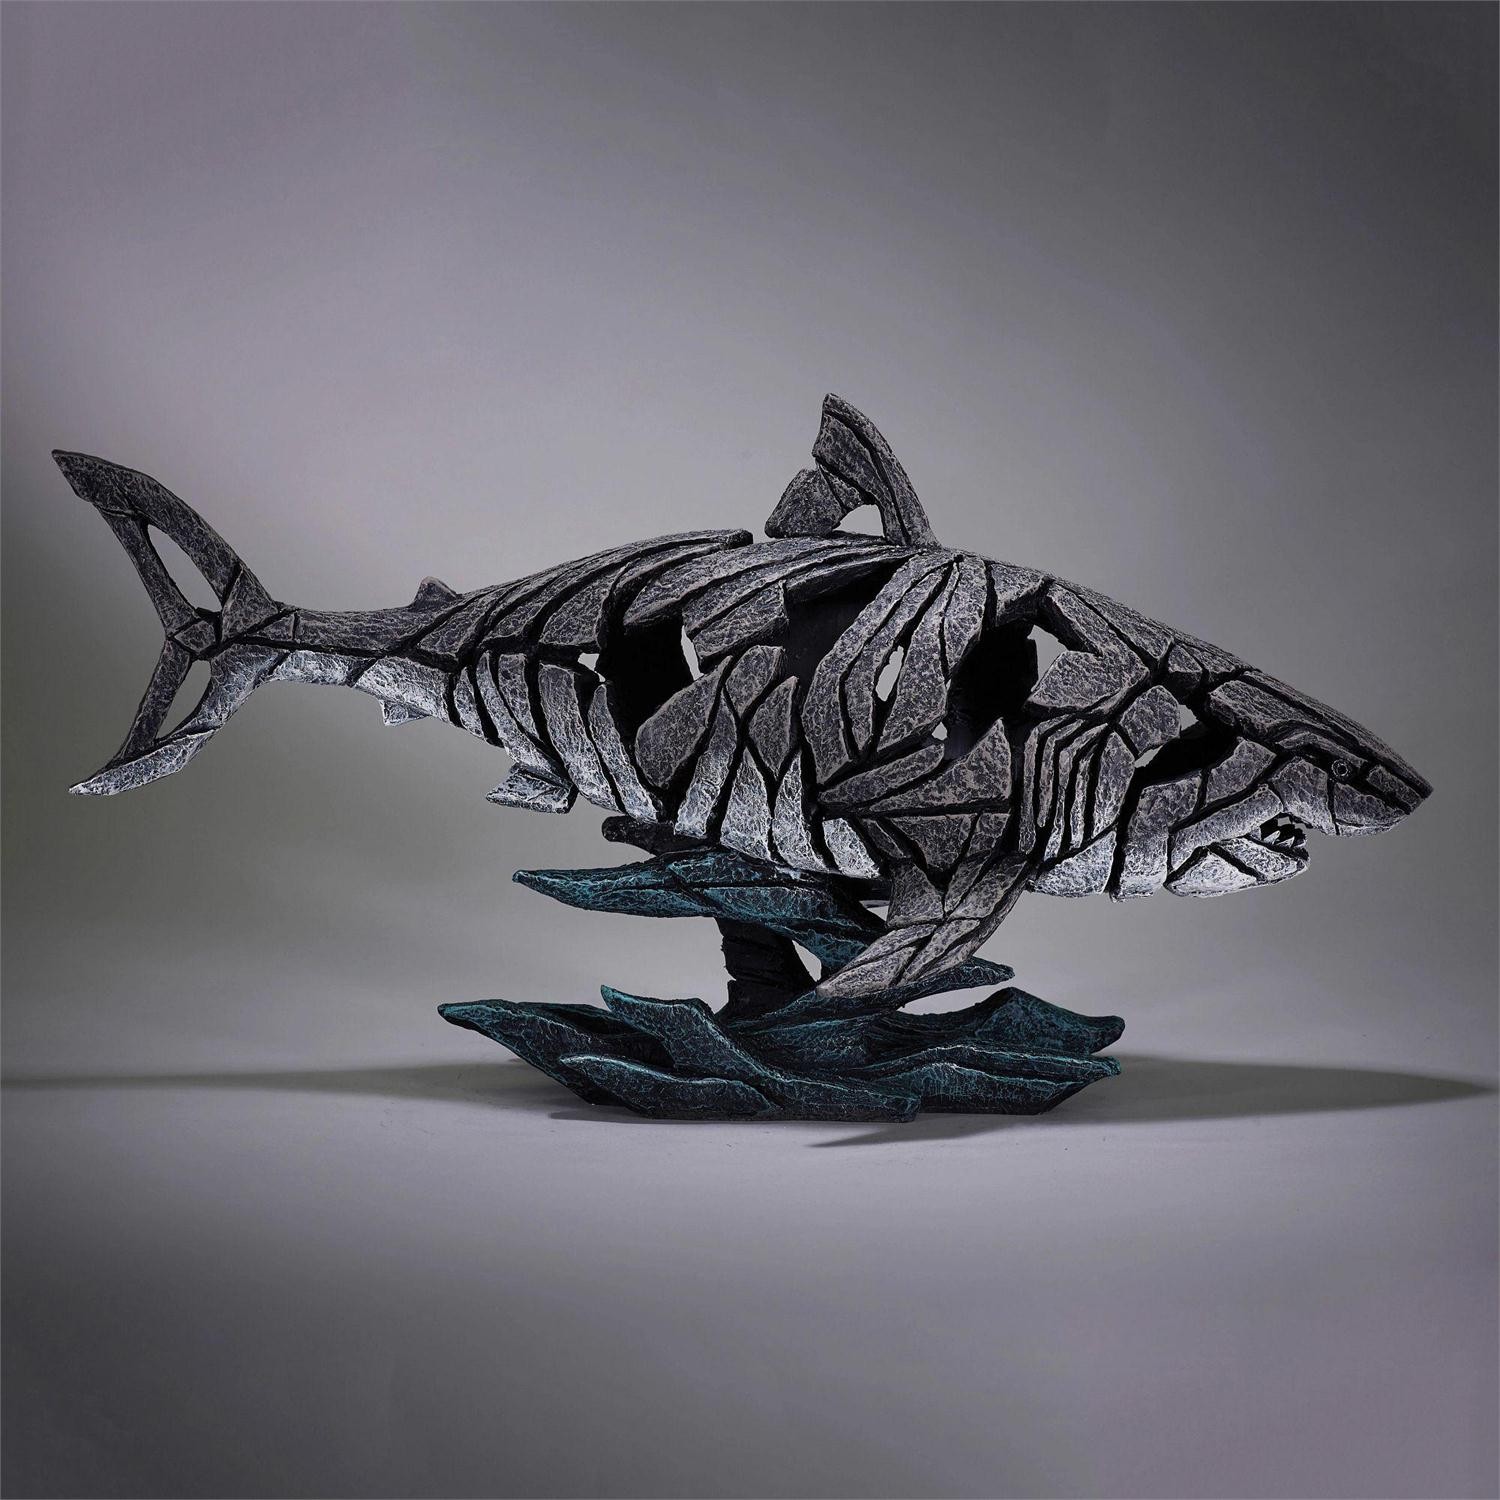 Enesco Gifts Matt Buckley The Edge Sculpture Shark Figurine Free Shipping Ivey's Gifts And Decor